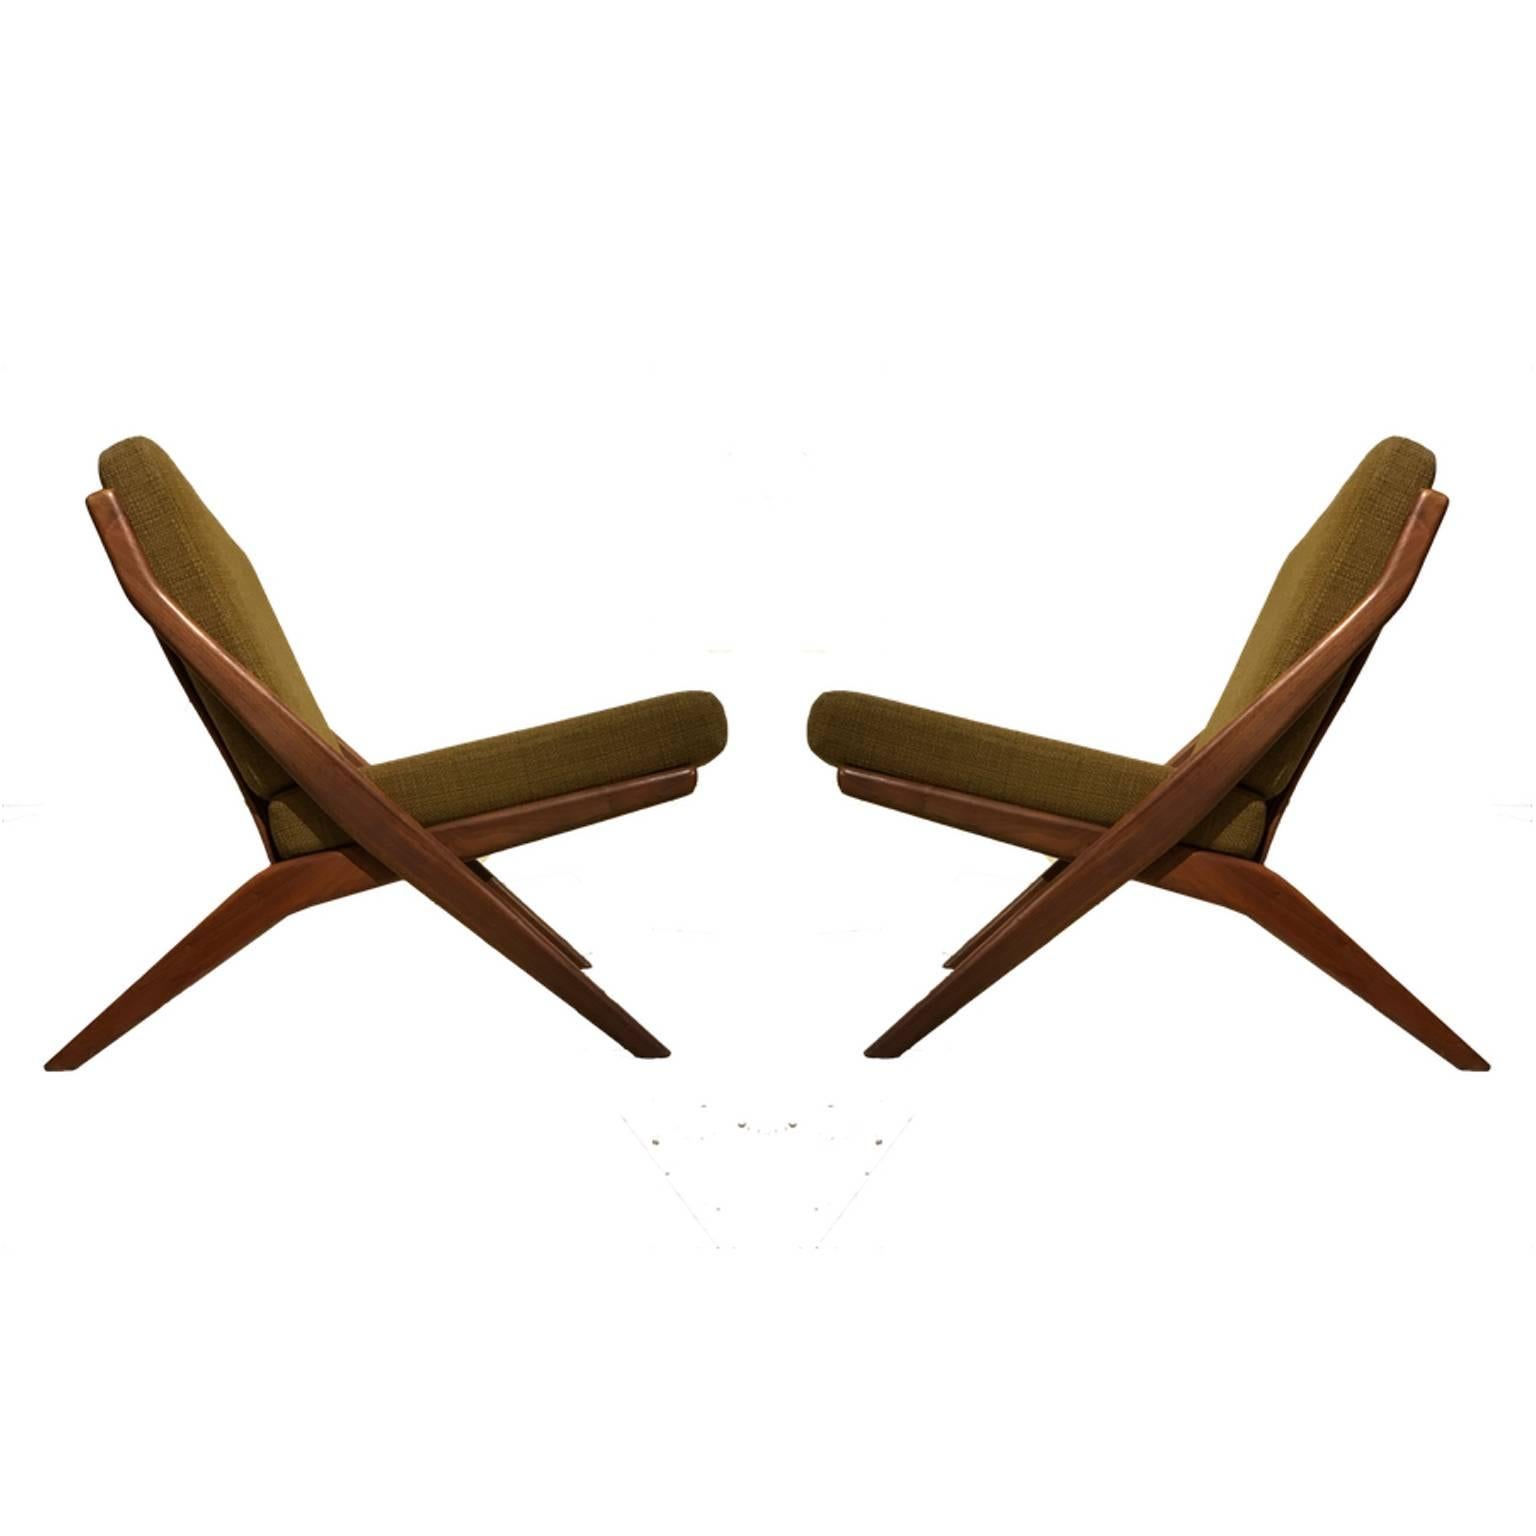 A great pair of sculptural Folke Ohlsson scissor chairs with walnut frames in very good original condition. Straps or webbing in great condition. Original fabric shows very minor wear. Maintains Dux label.